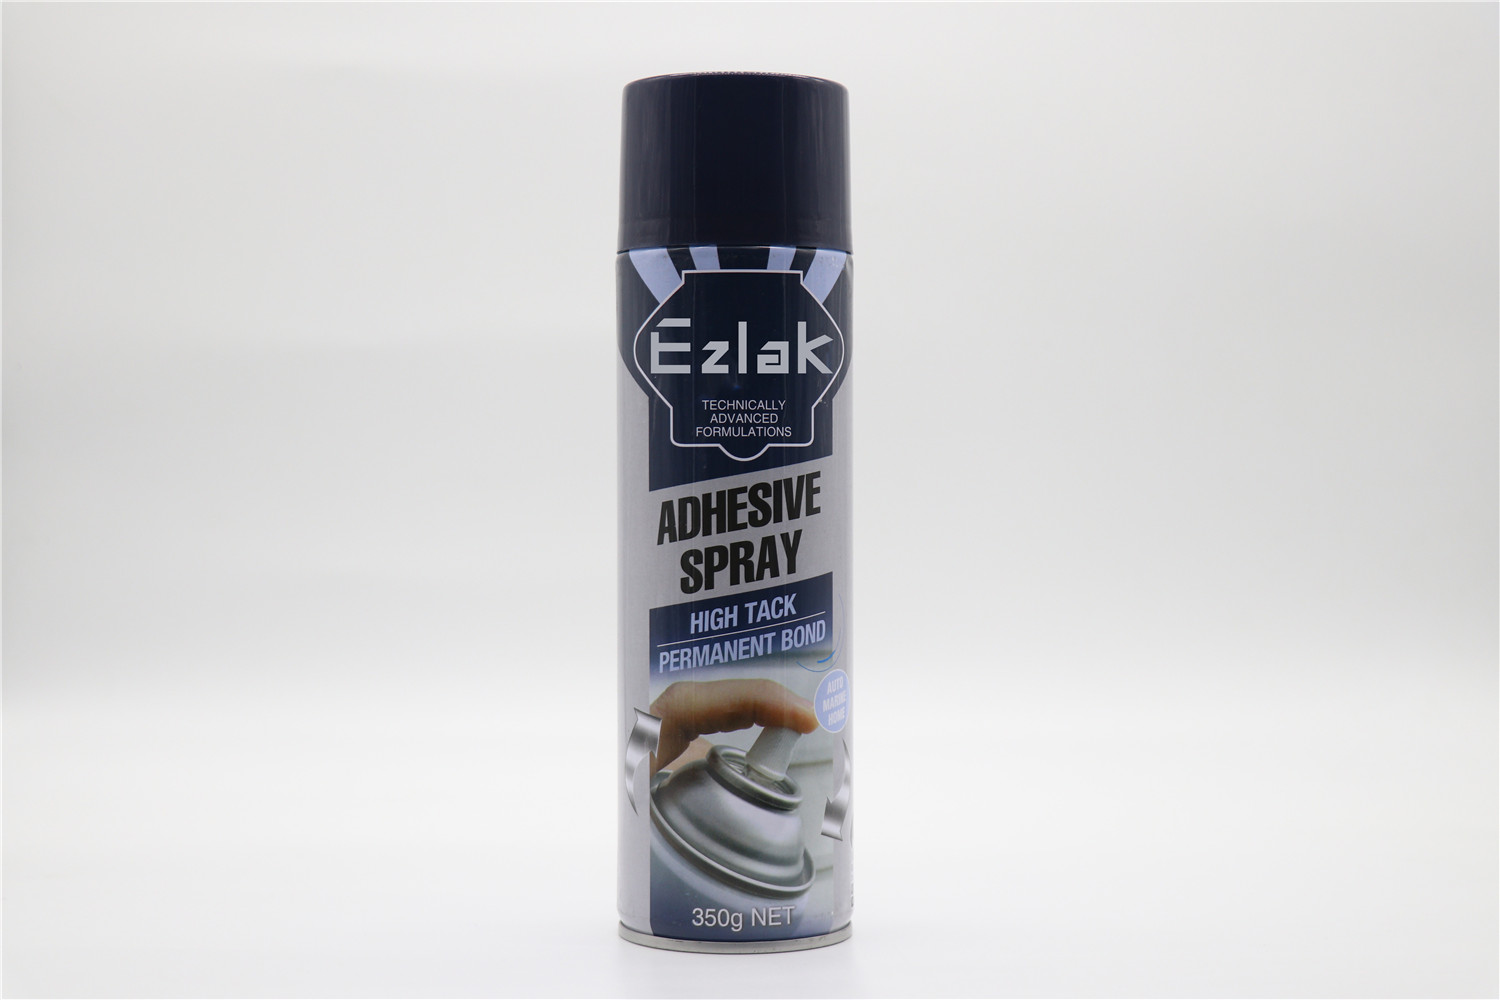 Easy use most surface suitable household adhesive spray